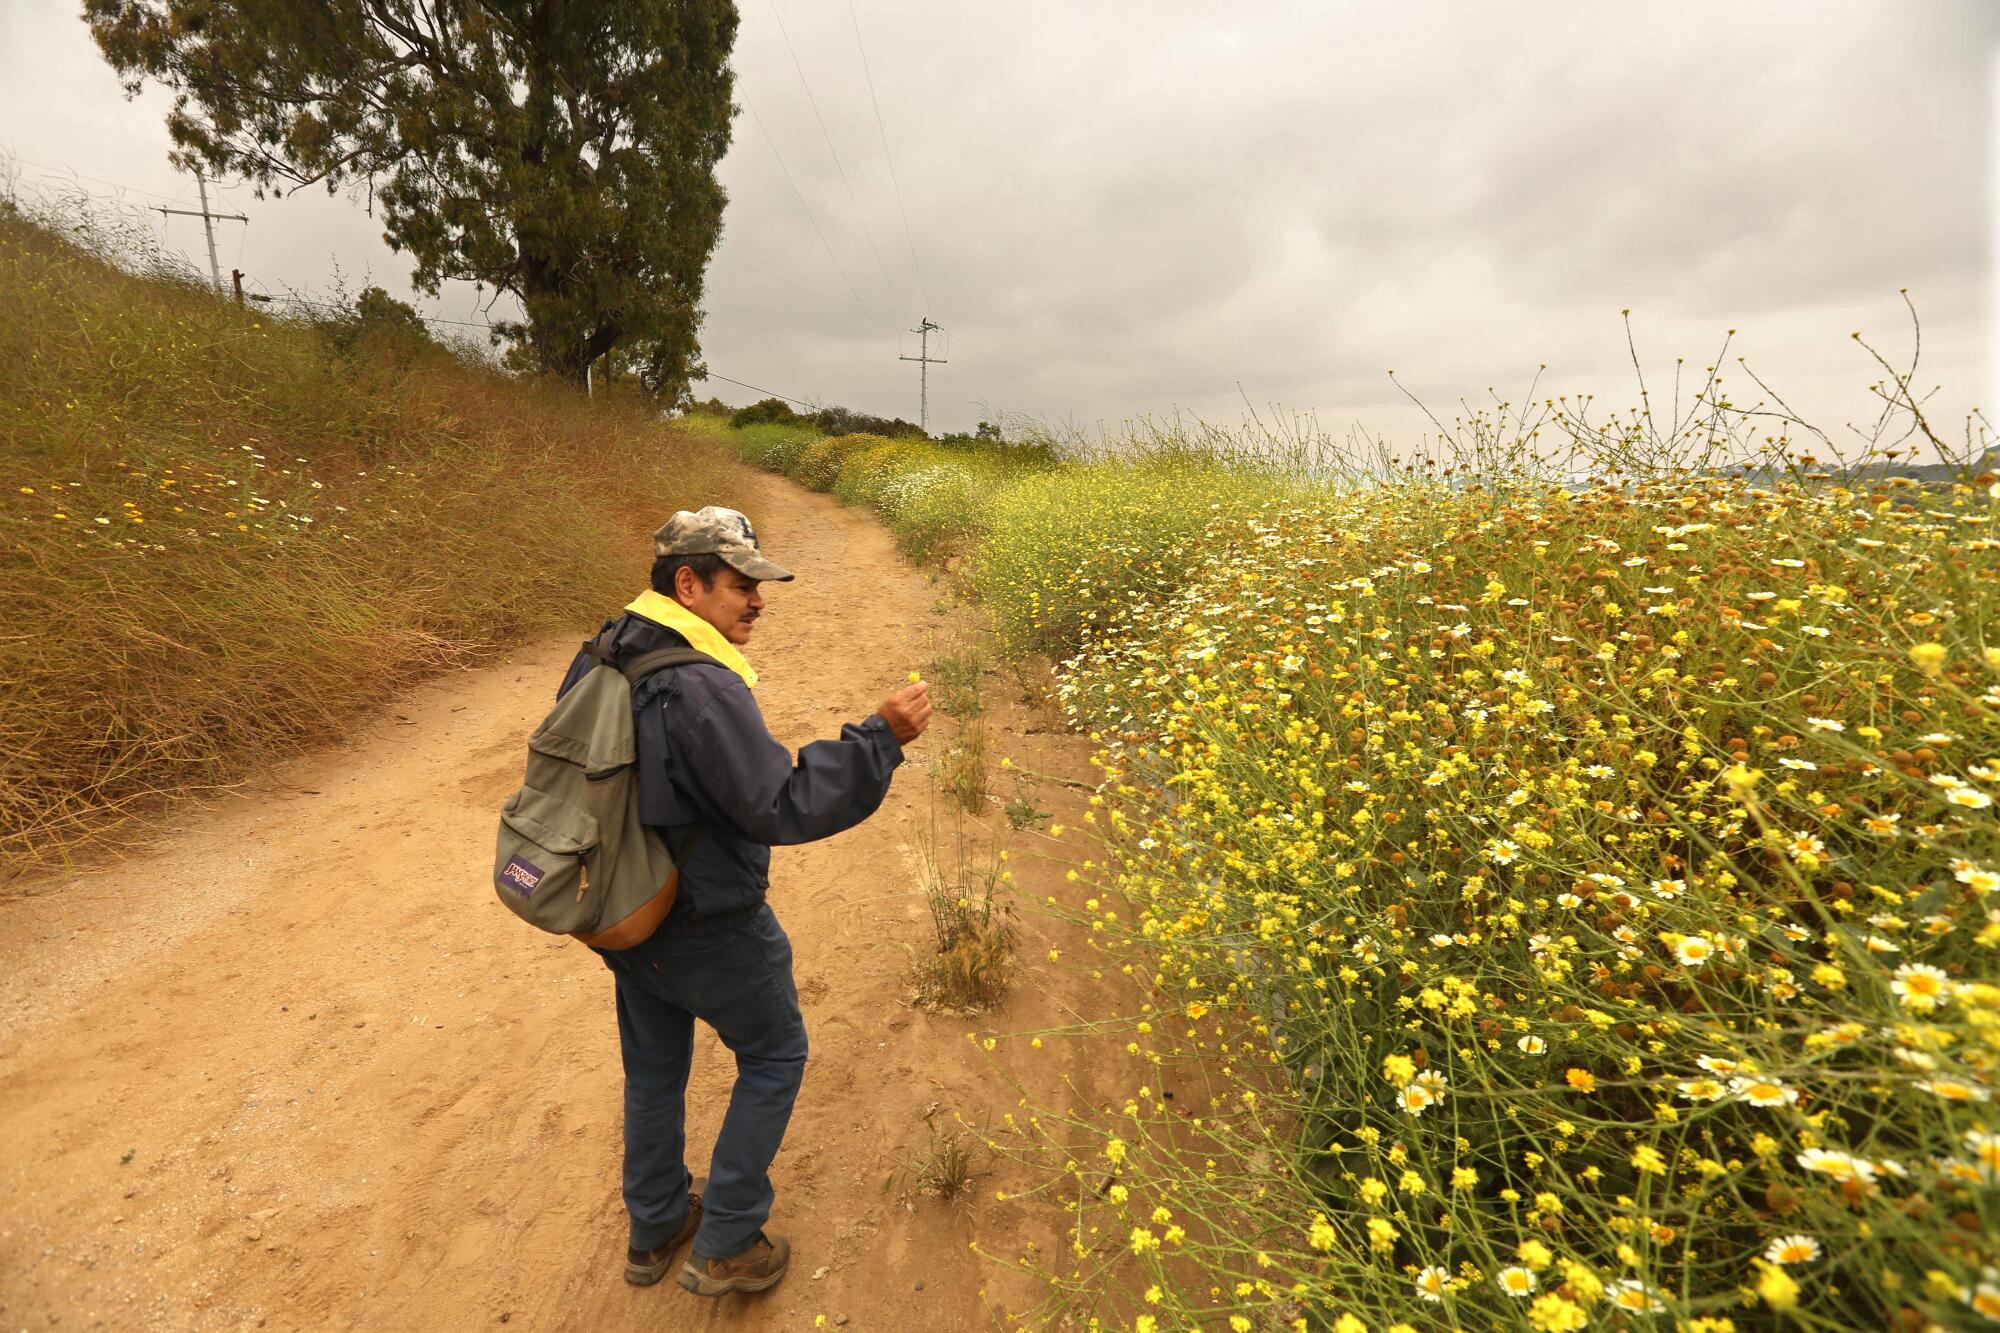 A man in a baseball cap and jacket and carrying a backpack checks a mustard plant among others along a dirt path.